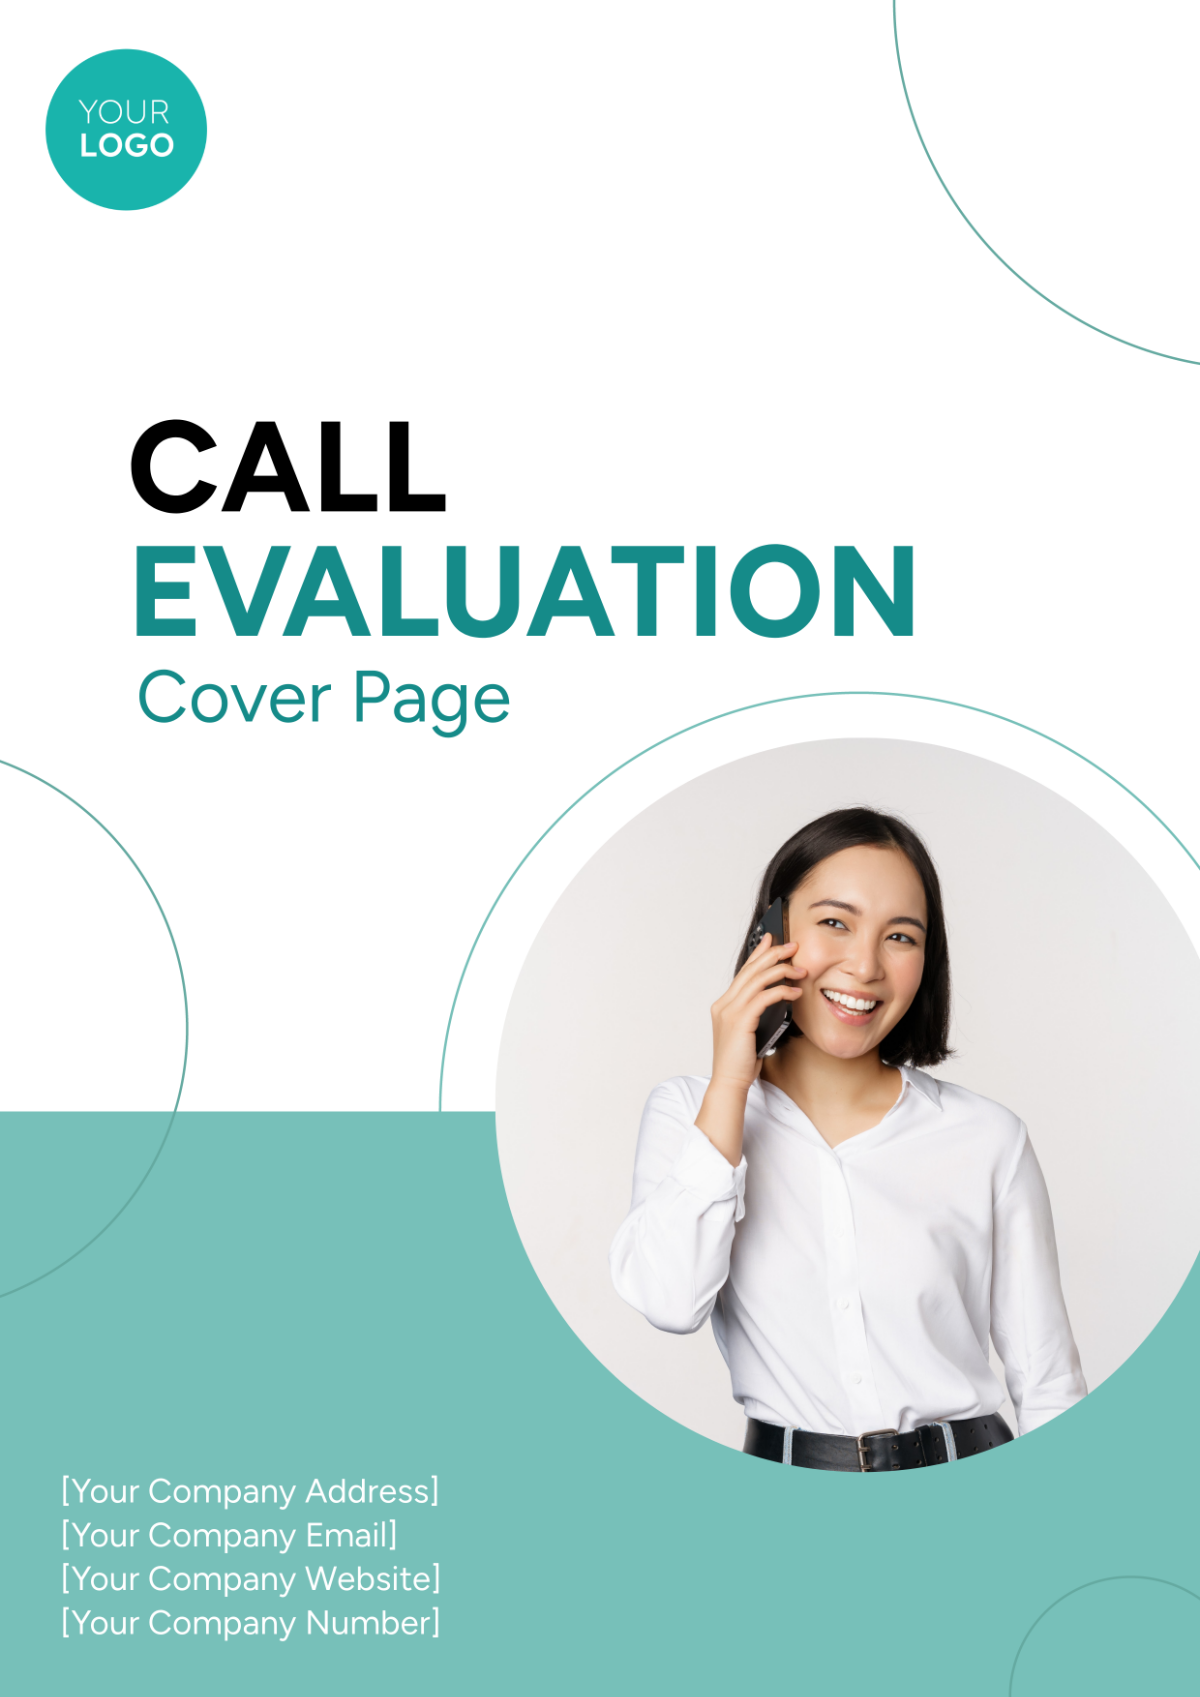 Call Evaluation Cover Page